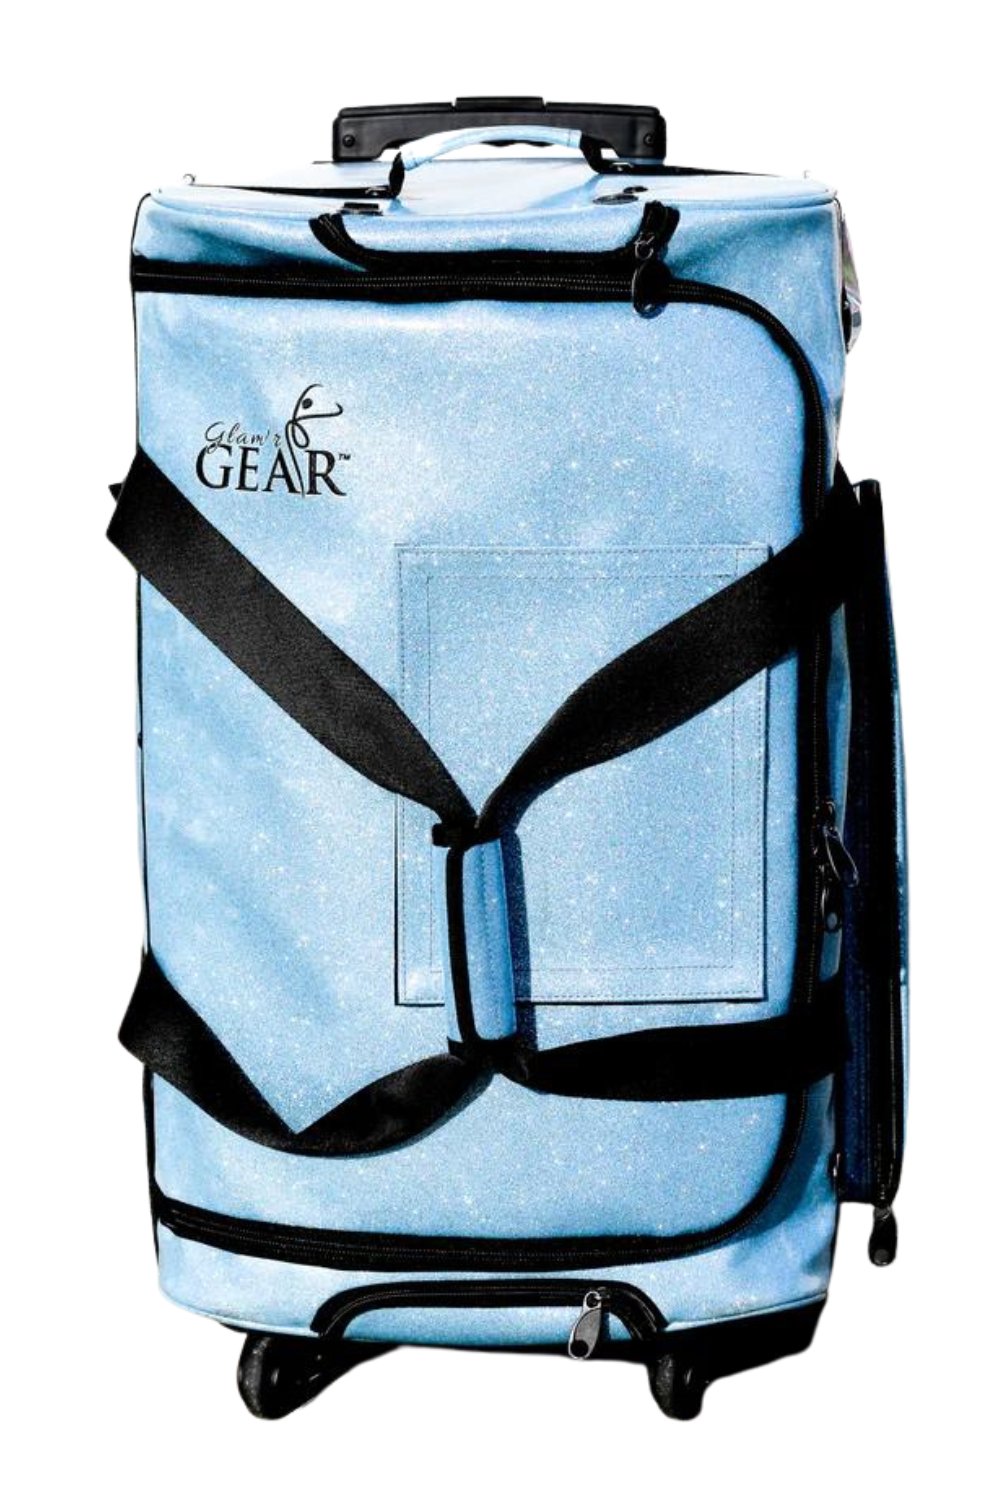 GLAM'R GEAR MOBILE CHANGING STATION DUFFEL LARGE